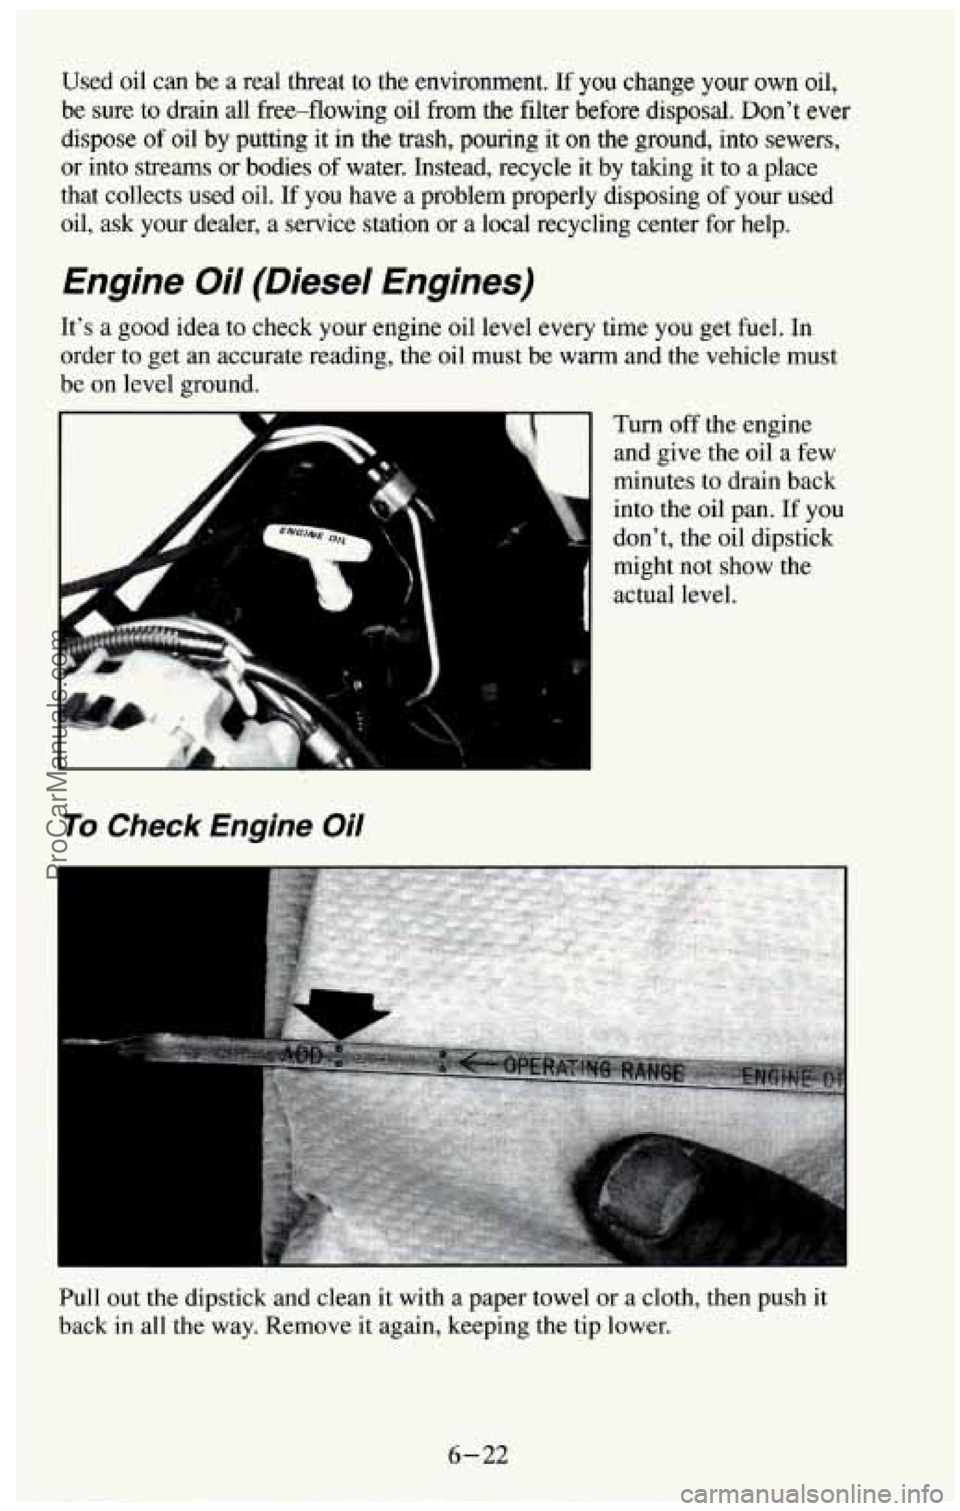 CHEVROLET SUBURBAN 1994  Owners Manual Used  oil can be a real threat to the  environment. If you change your own oil, 
be sure to drain all  free-flowing oil from the filter before disposal.  Dont ever 
dispose  of oil  by putting  it  i